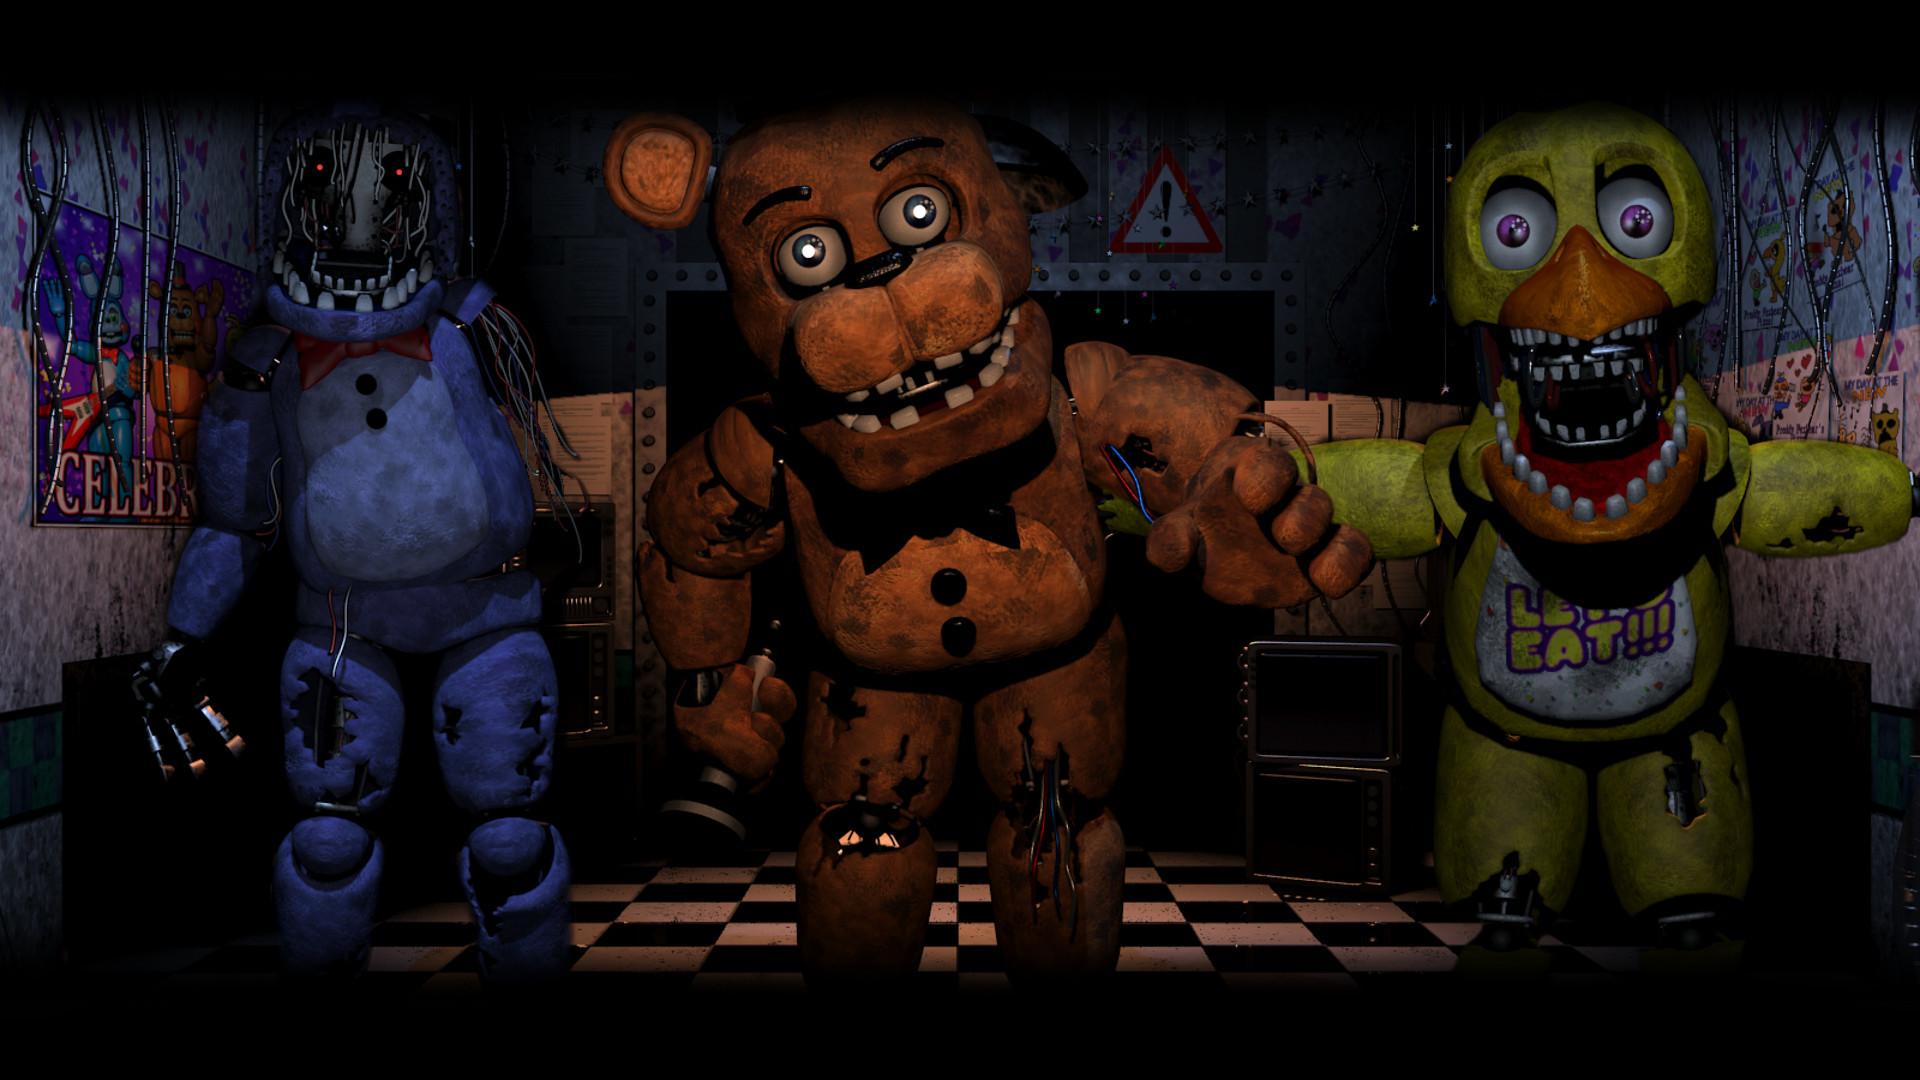 New Five Nights At Freddy's Game Revealed, Bringing